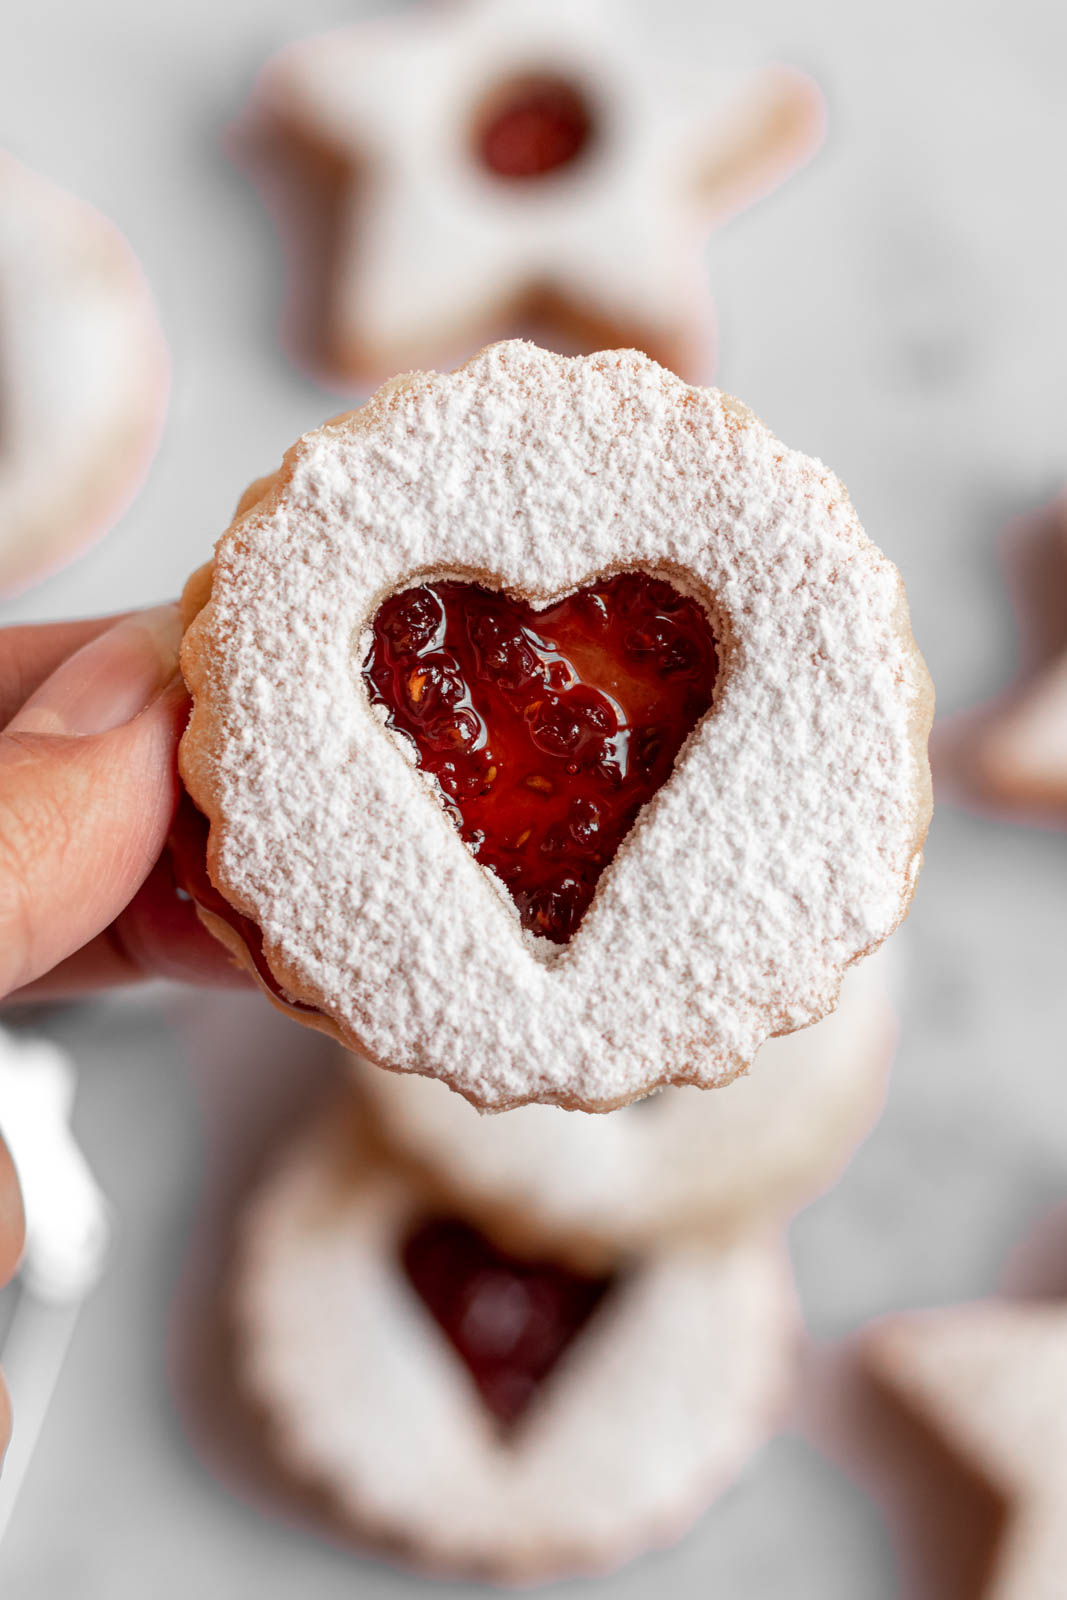 Hand holding a linzer cookie.